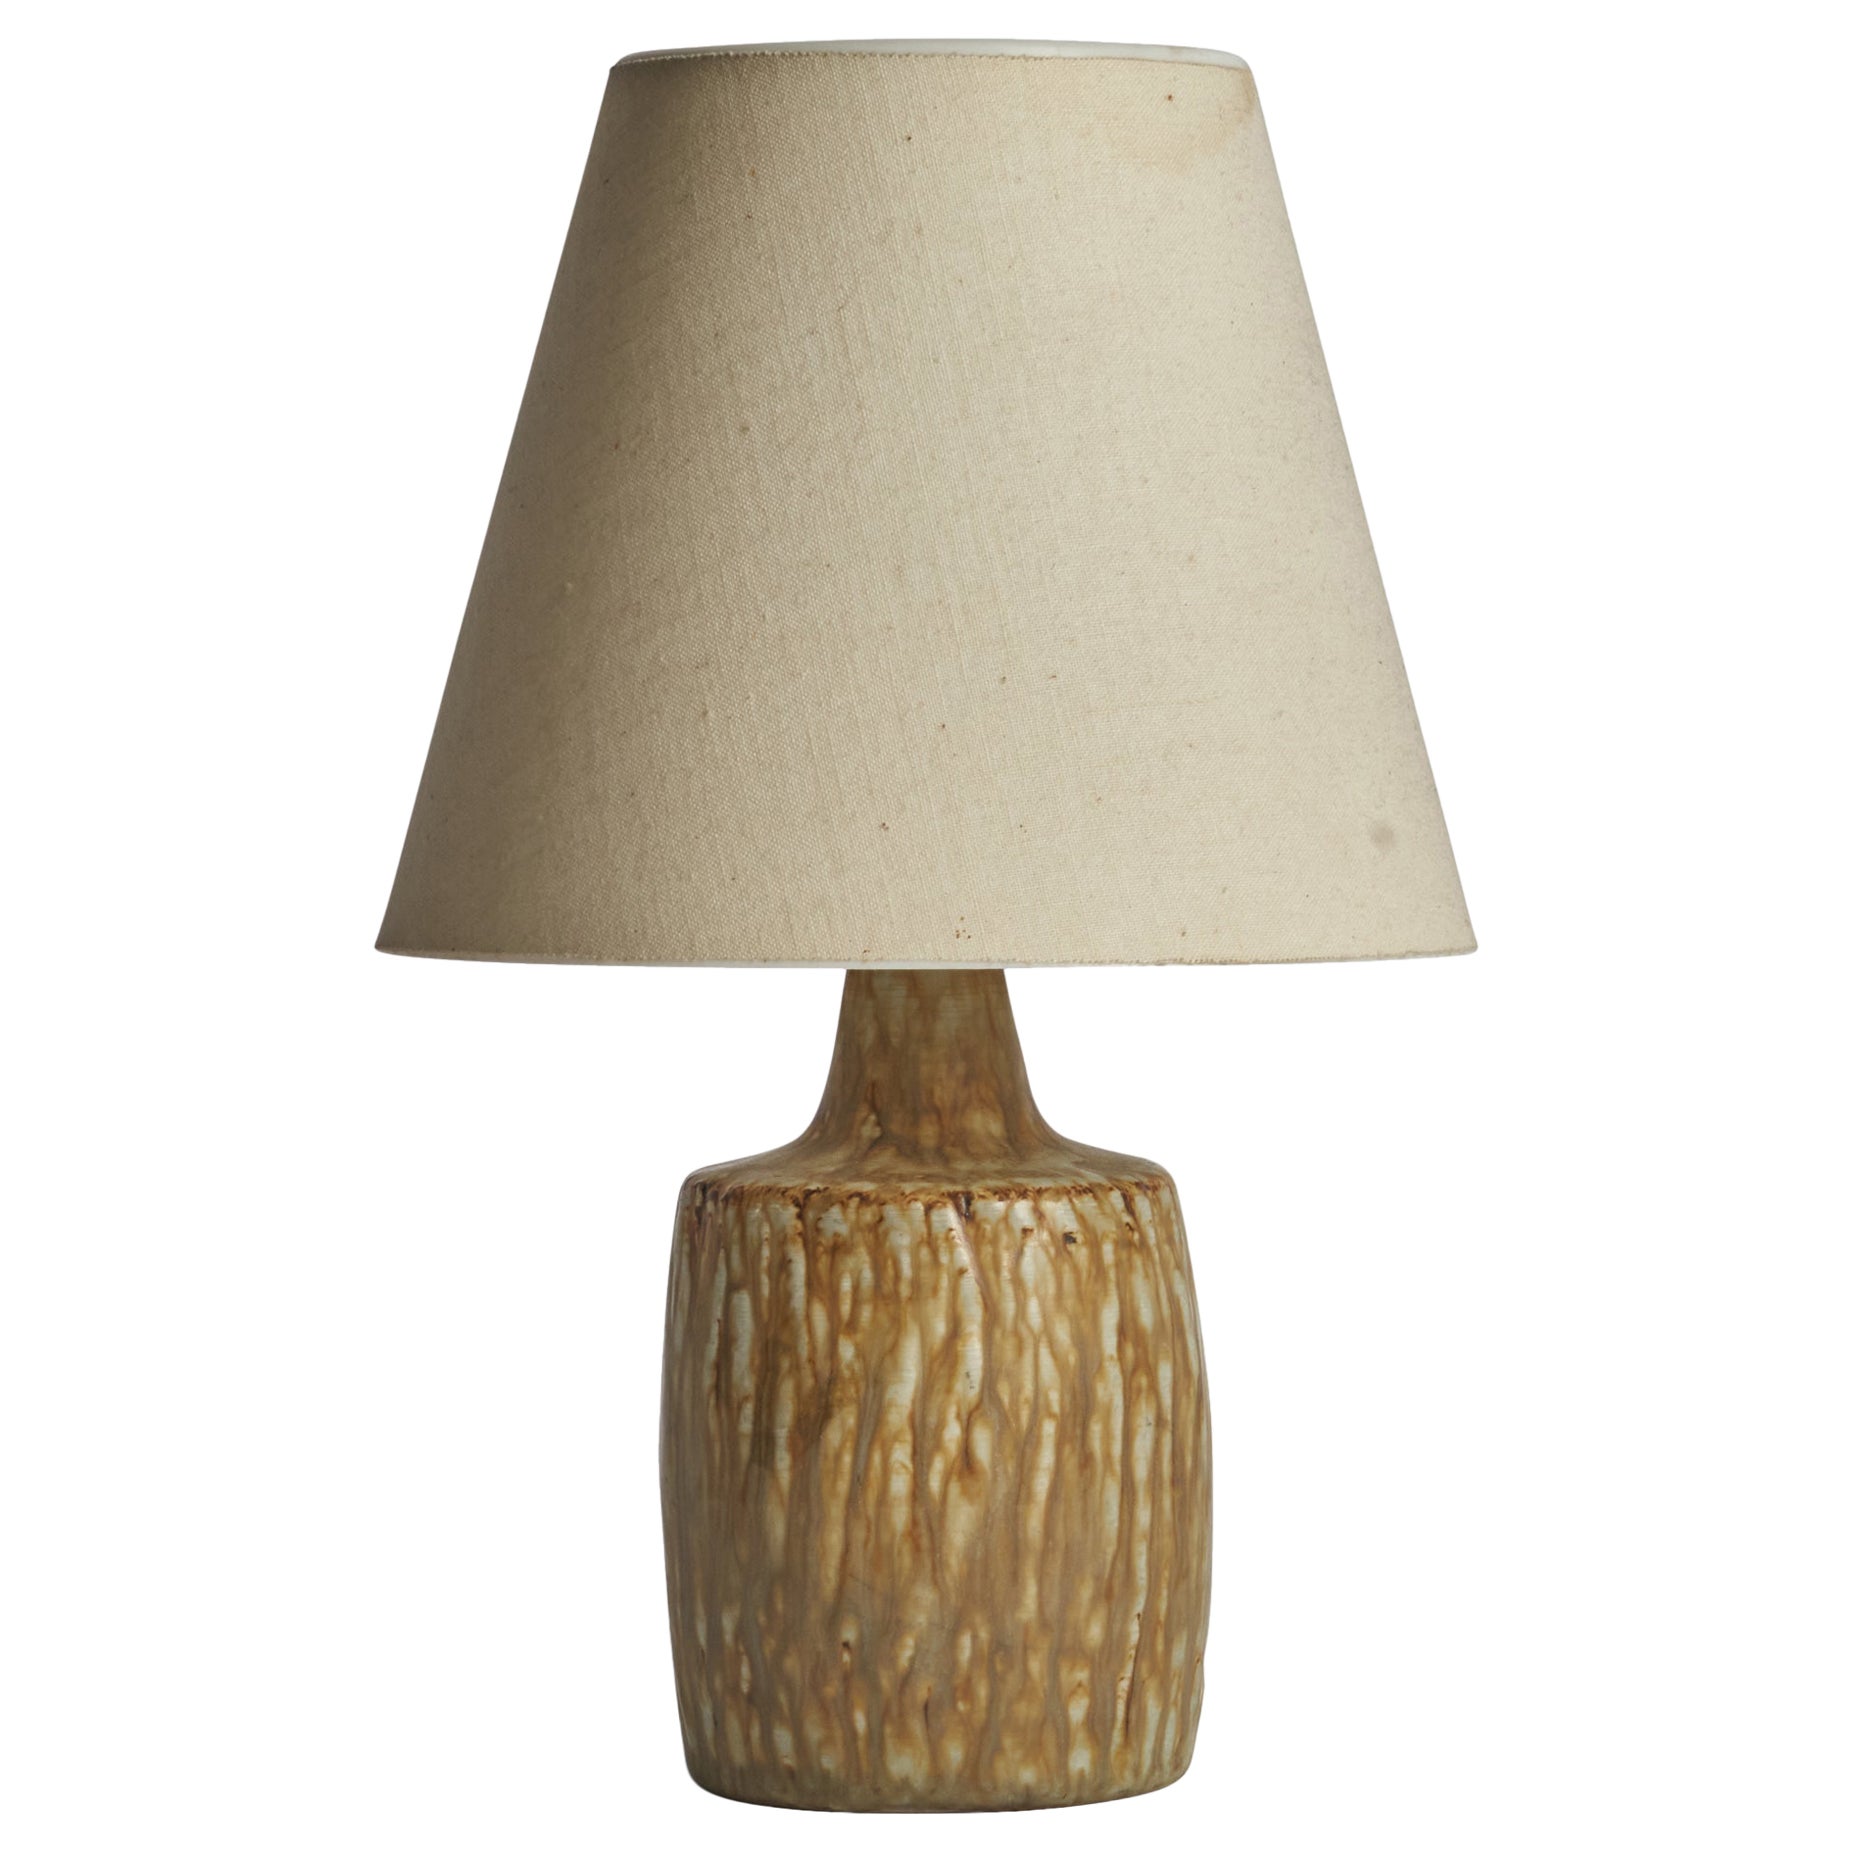 Gunnar Nylund, Table Lamp, Stoneware, Sweden, 1940s For Sale